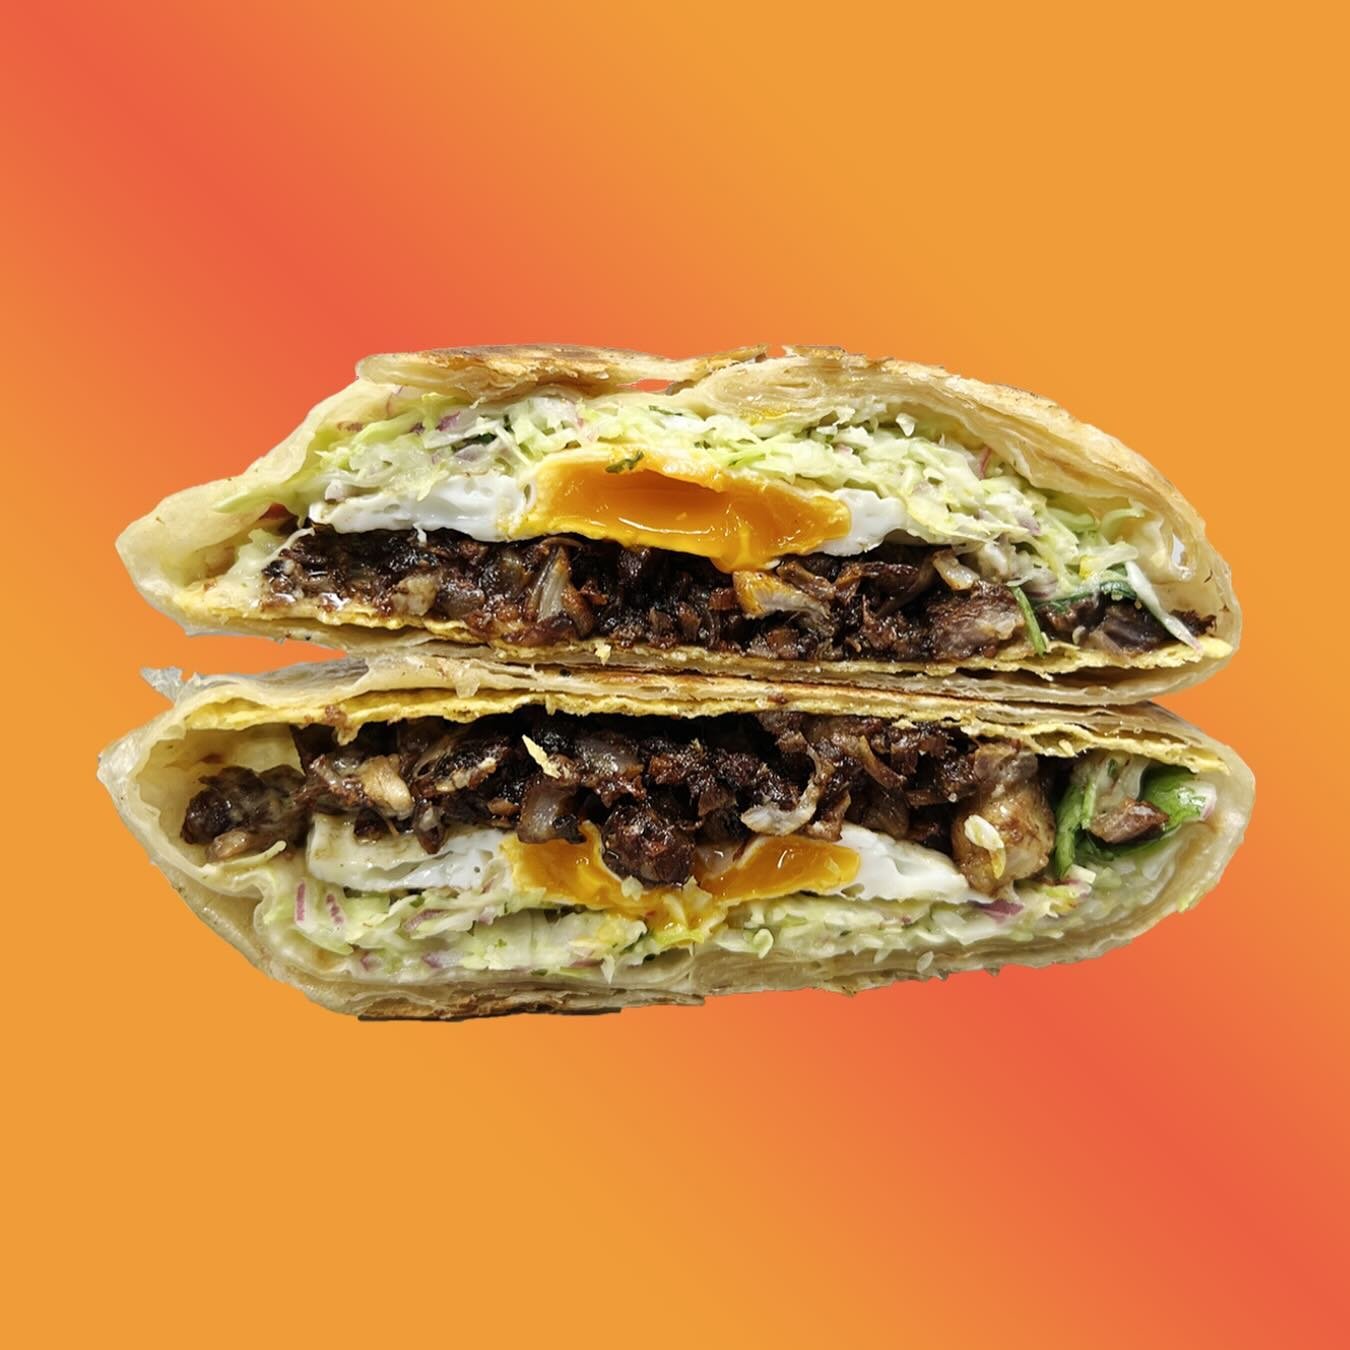 DUE TO TECHNICAL DIFFICULTIES, NEW SPECIAL TOMORROW: SISIG CRUNCHWRAP SUPREME&reg;

Sisig is a staple in the Filipino community, popularized by the city of Pampanga where my parents were born and raised. Sisig was created by a necessity to use &ldquo